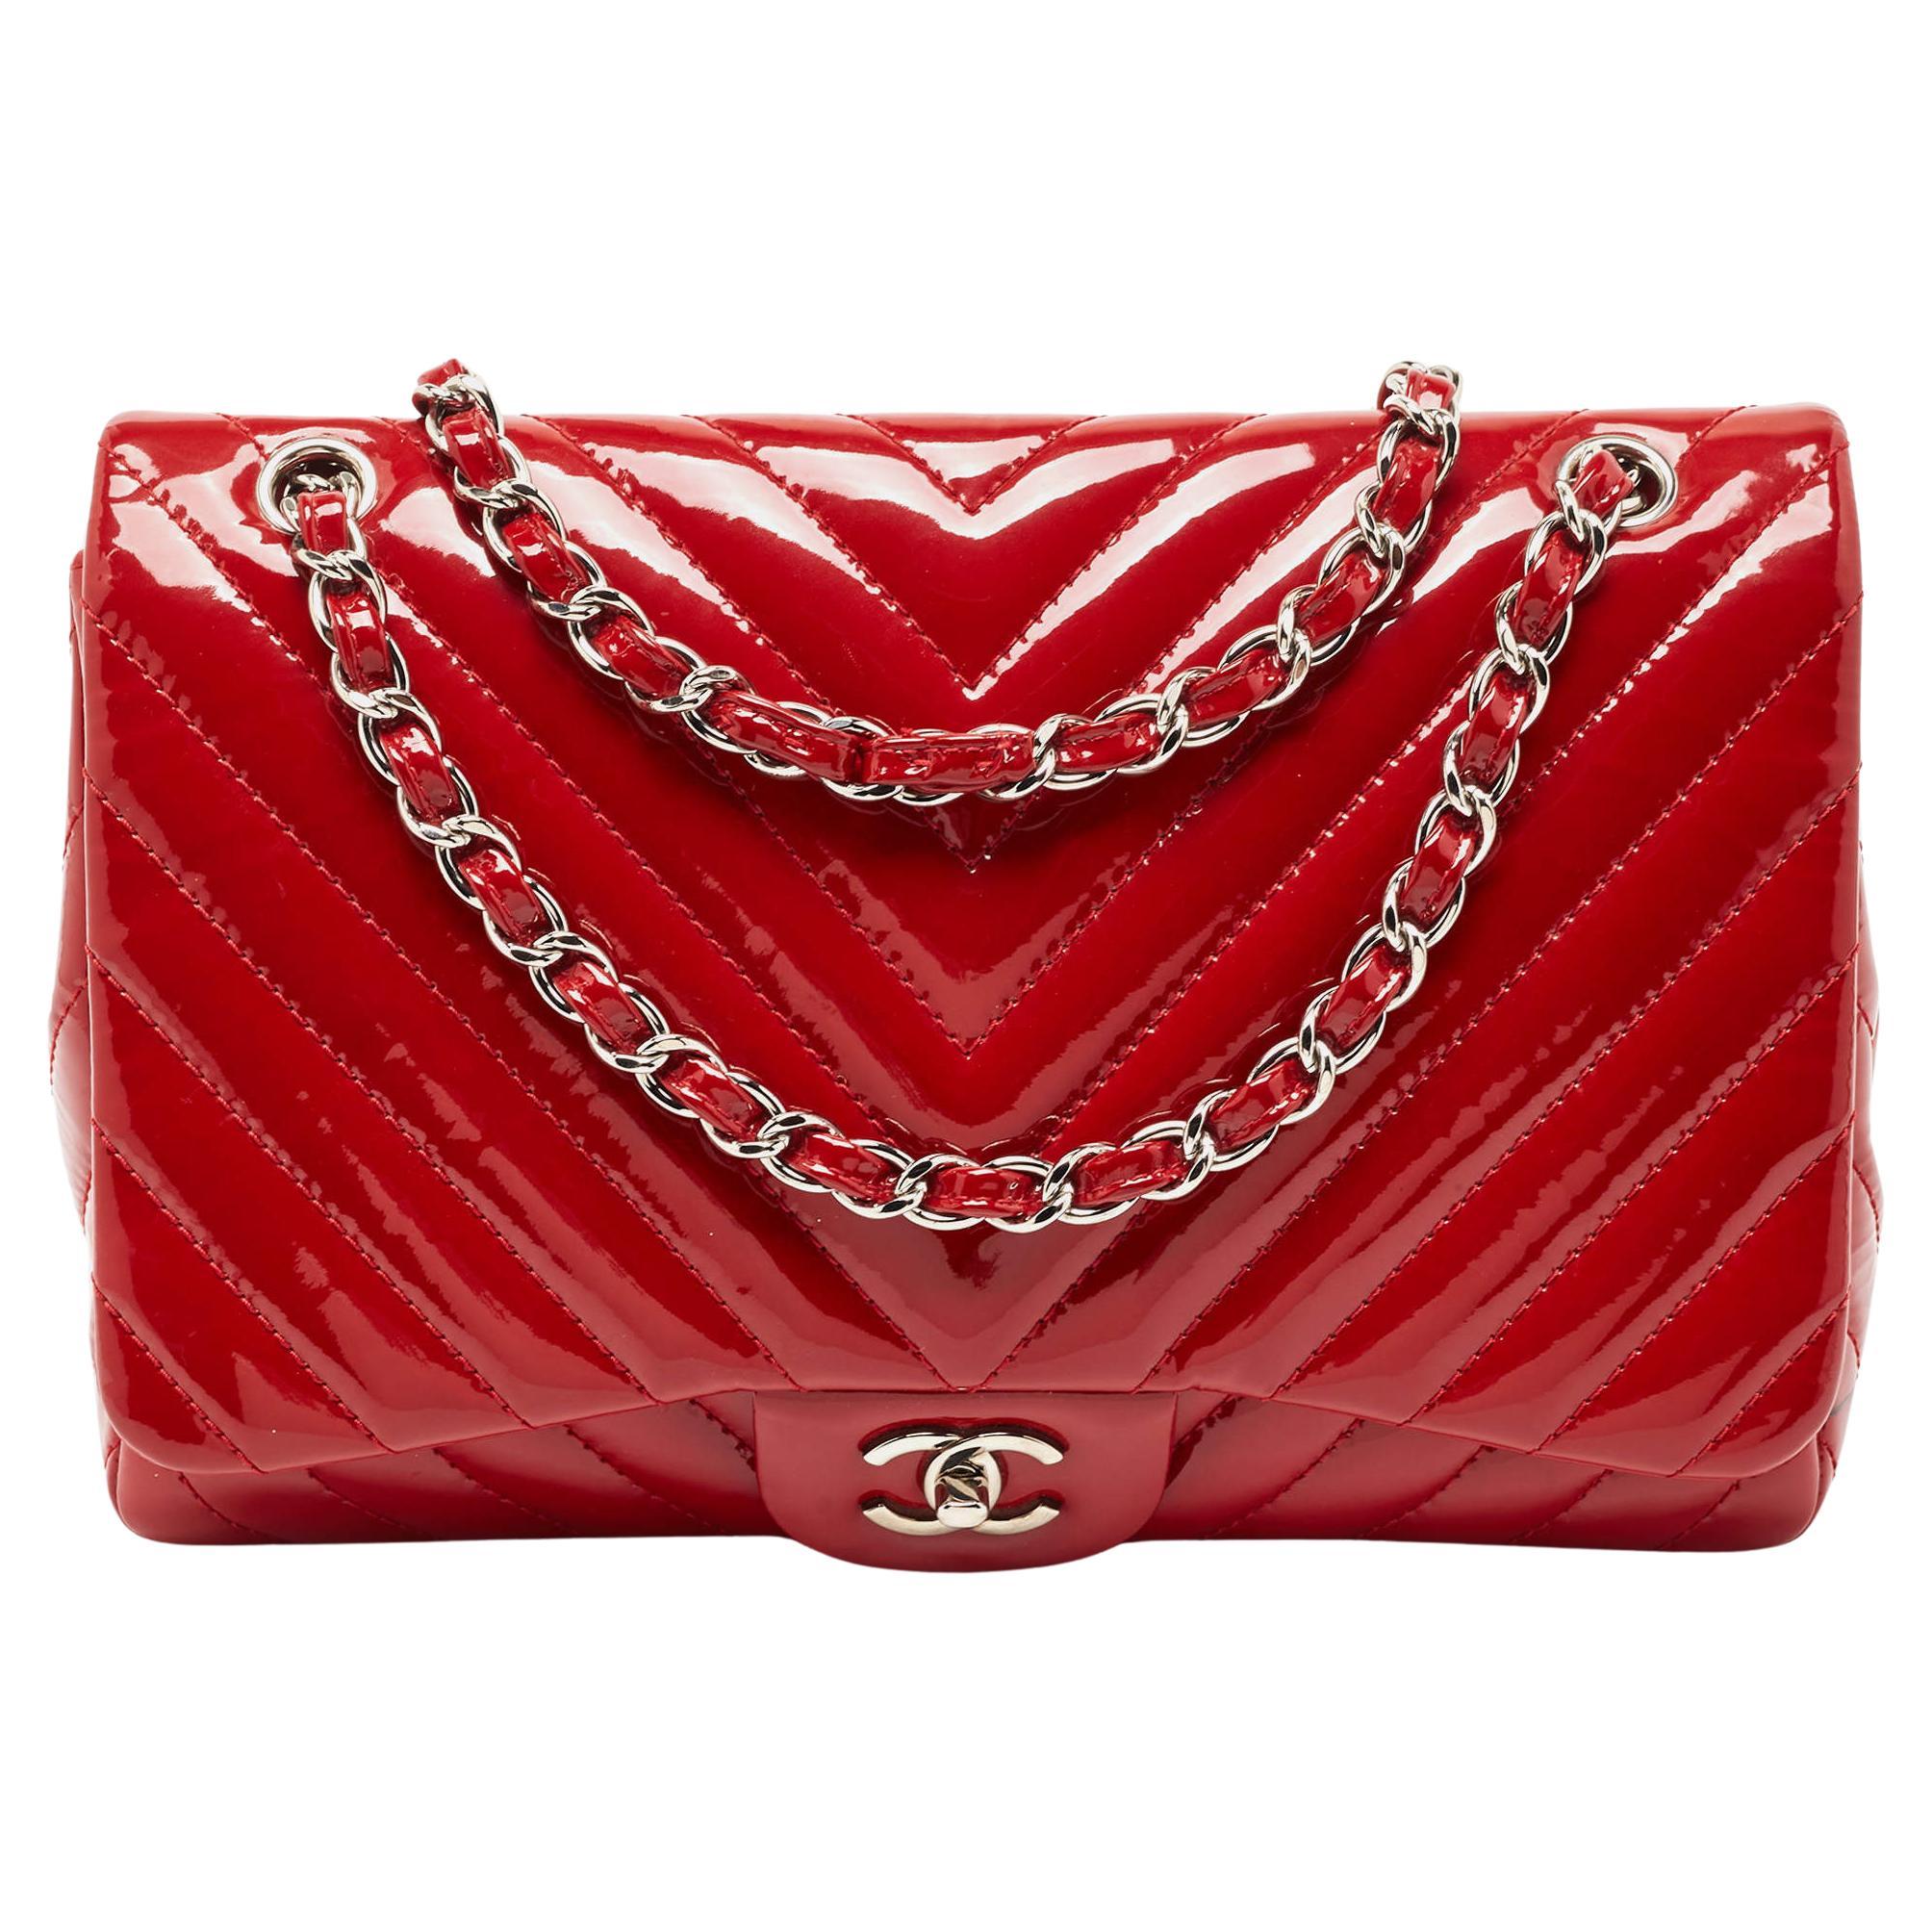 Chanel Red Patent Leather Chevron Jumbo Classic Flap Bag For Sale